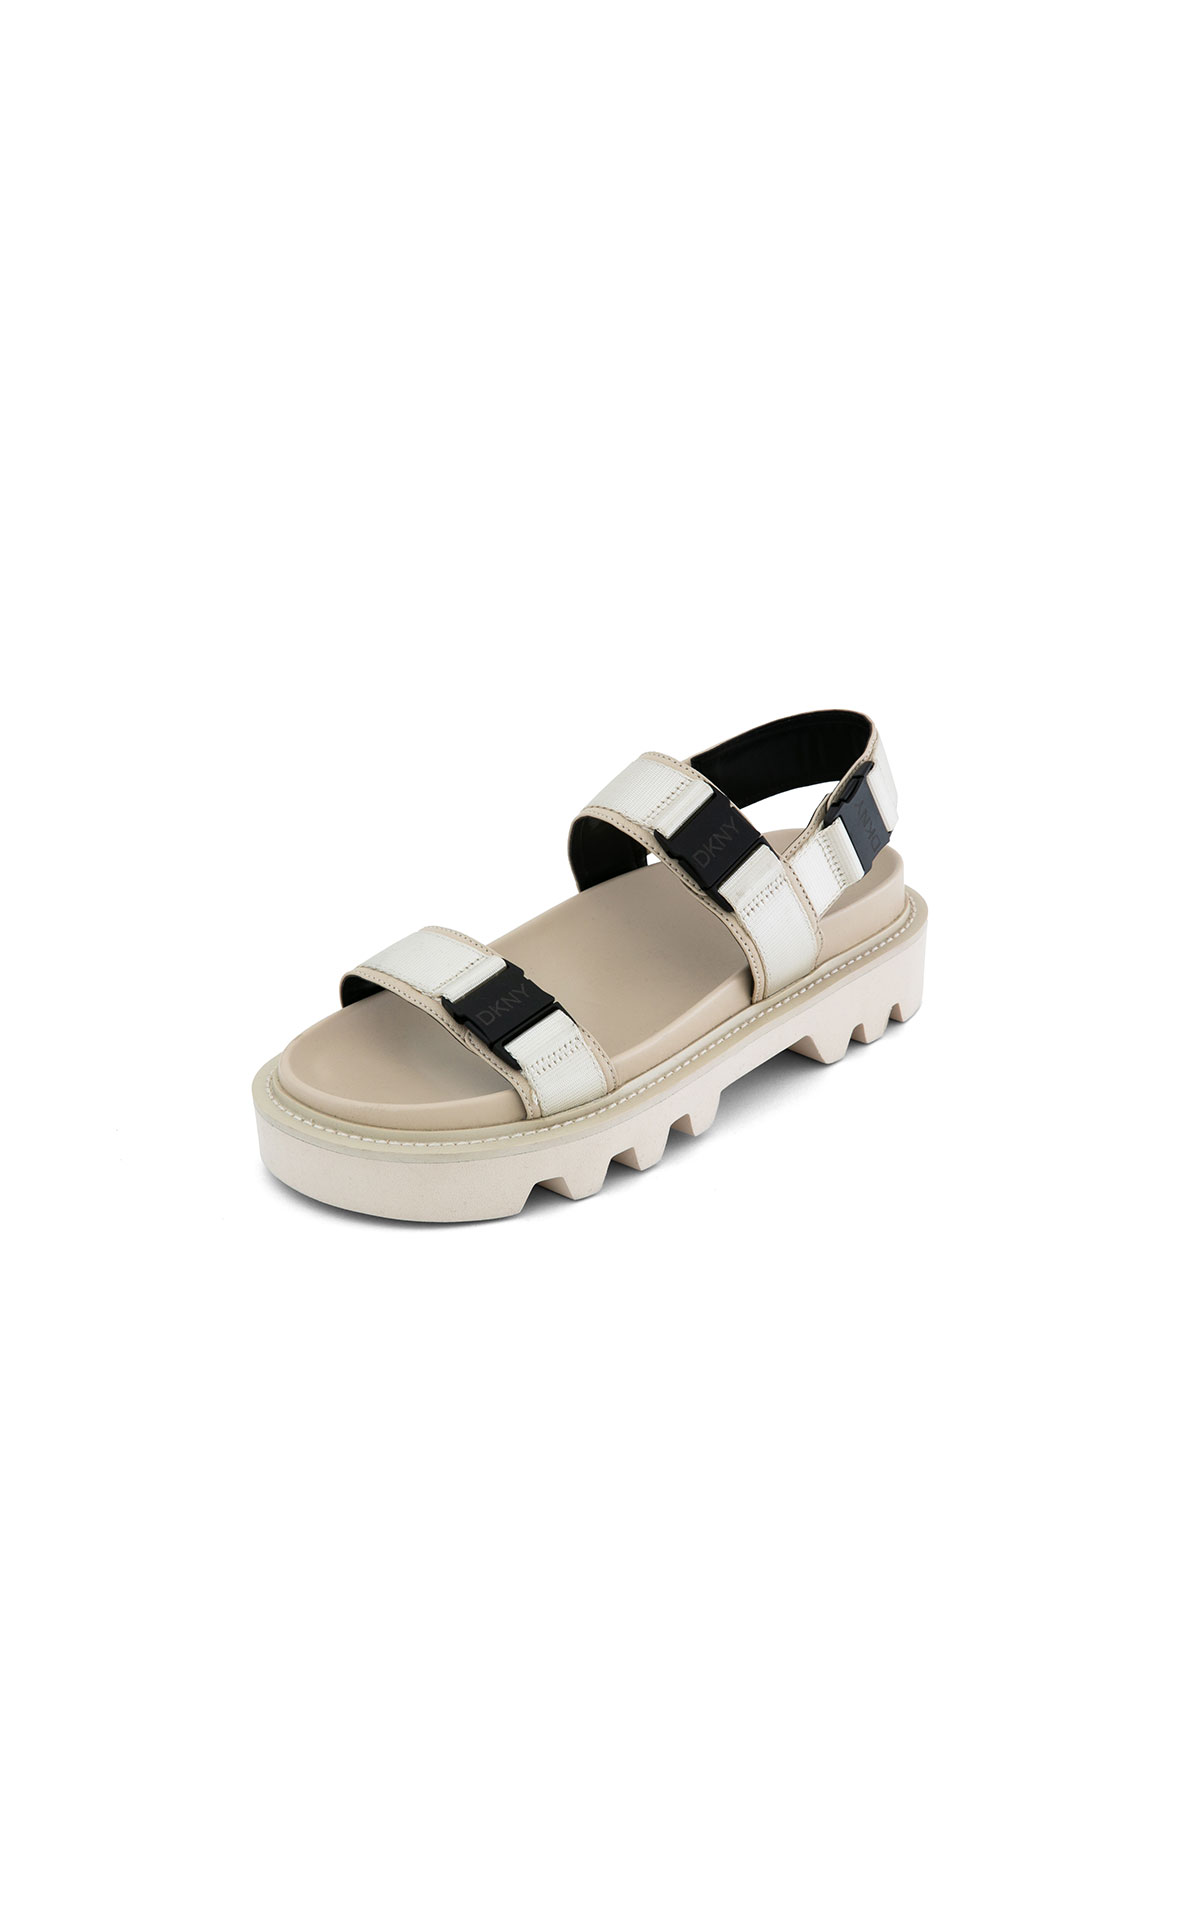 DKNY Gold buckle sports sandal from Bicester Village